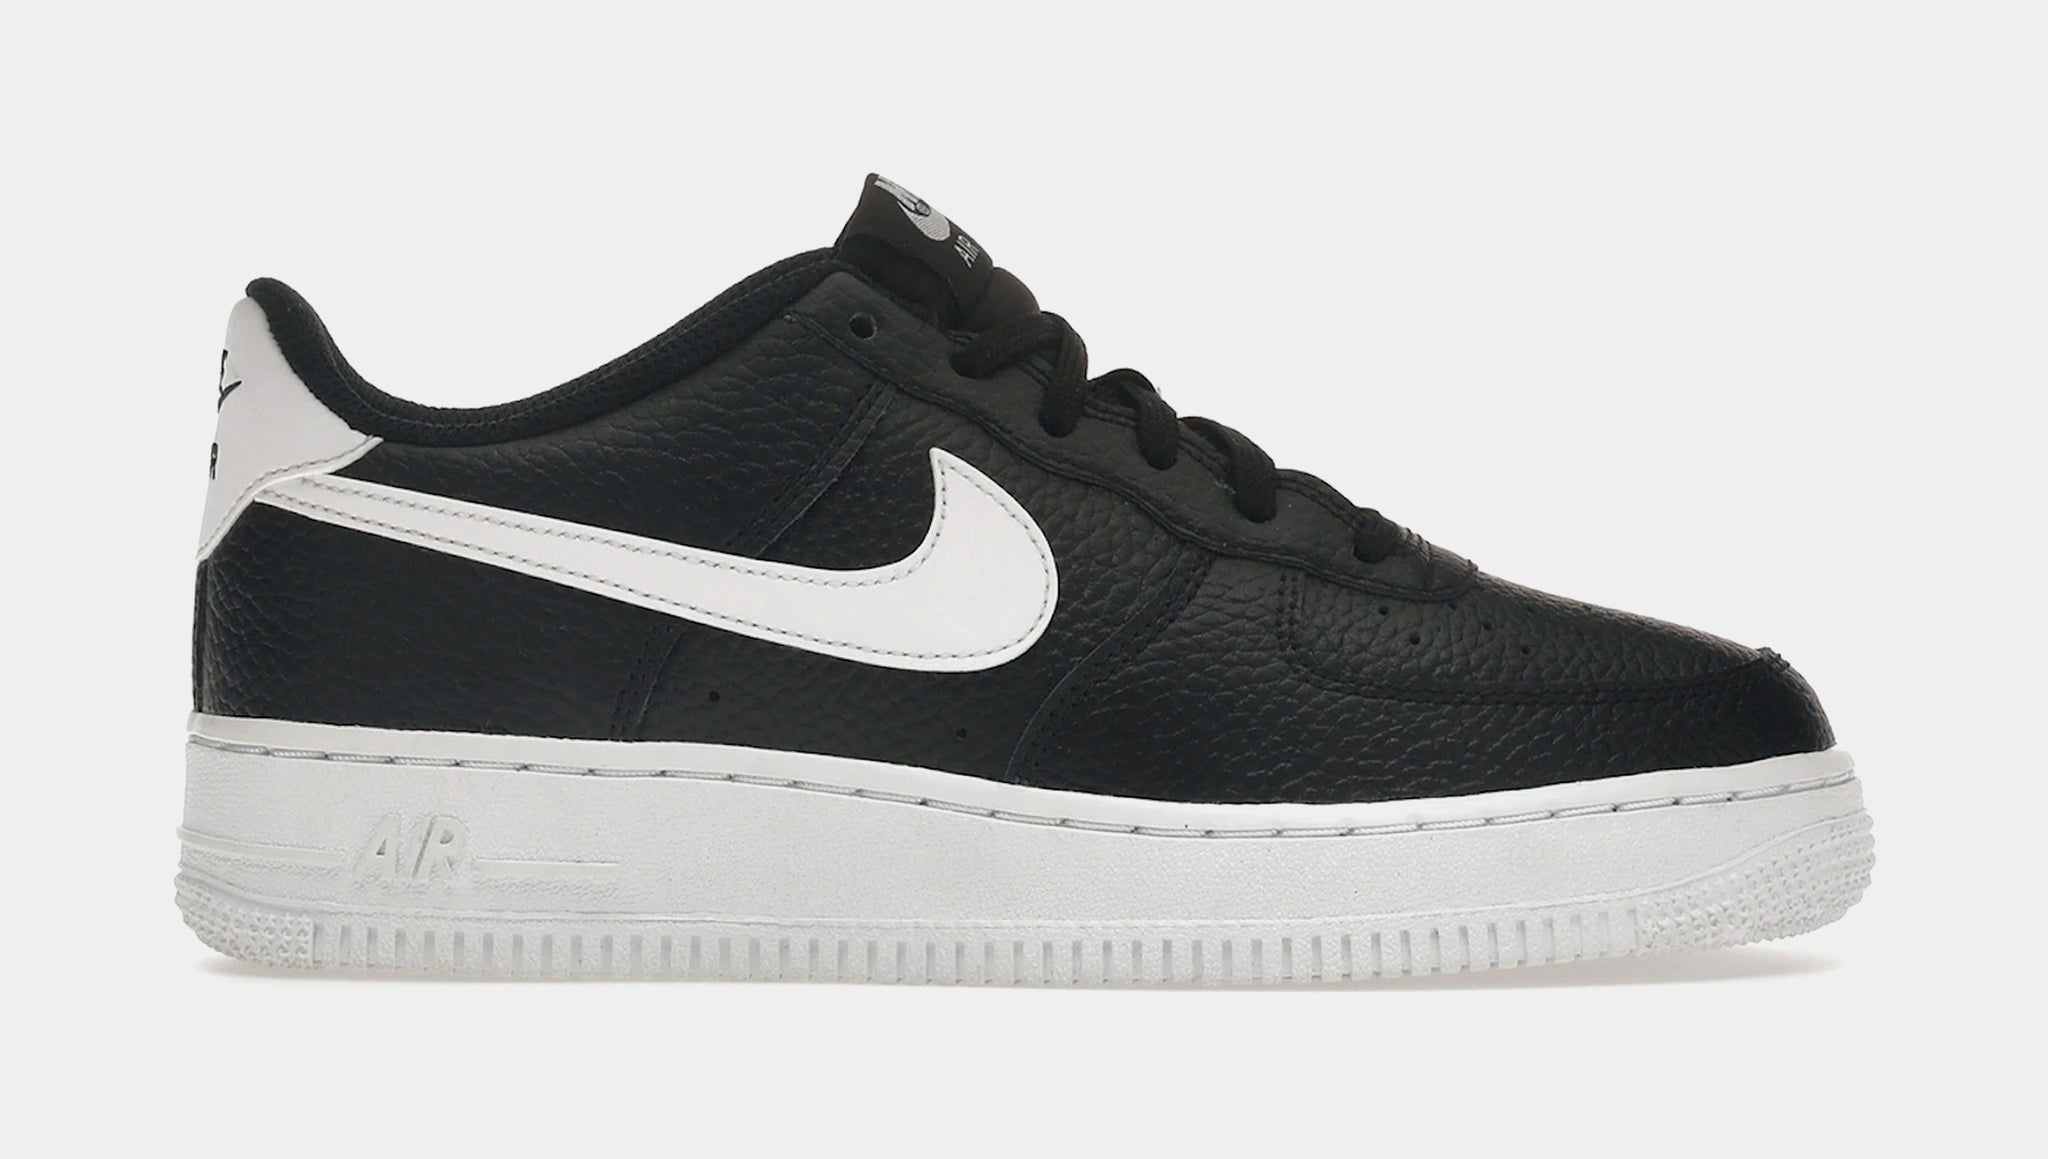 Nike Air Force 1 Low Grade School Lifestyle Shoes Black CT3839-002 ...